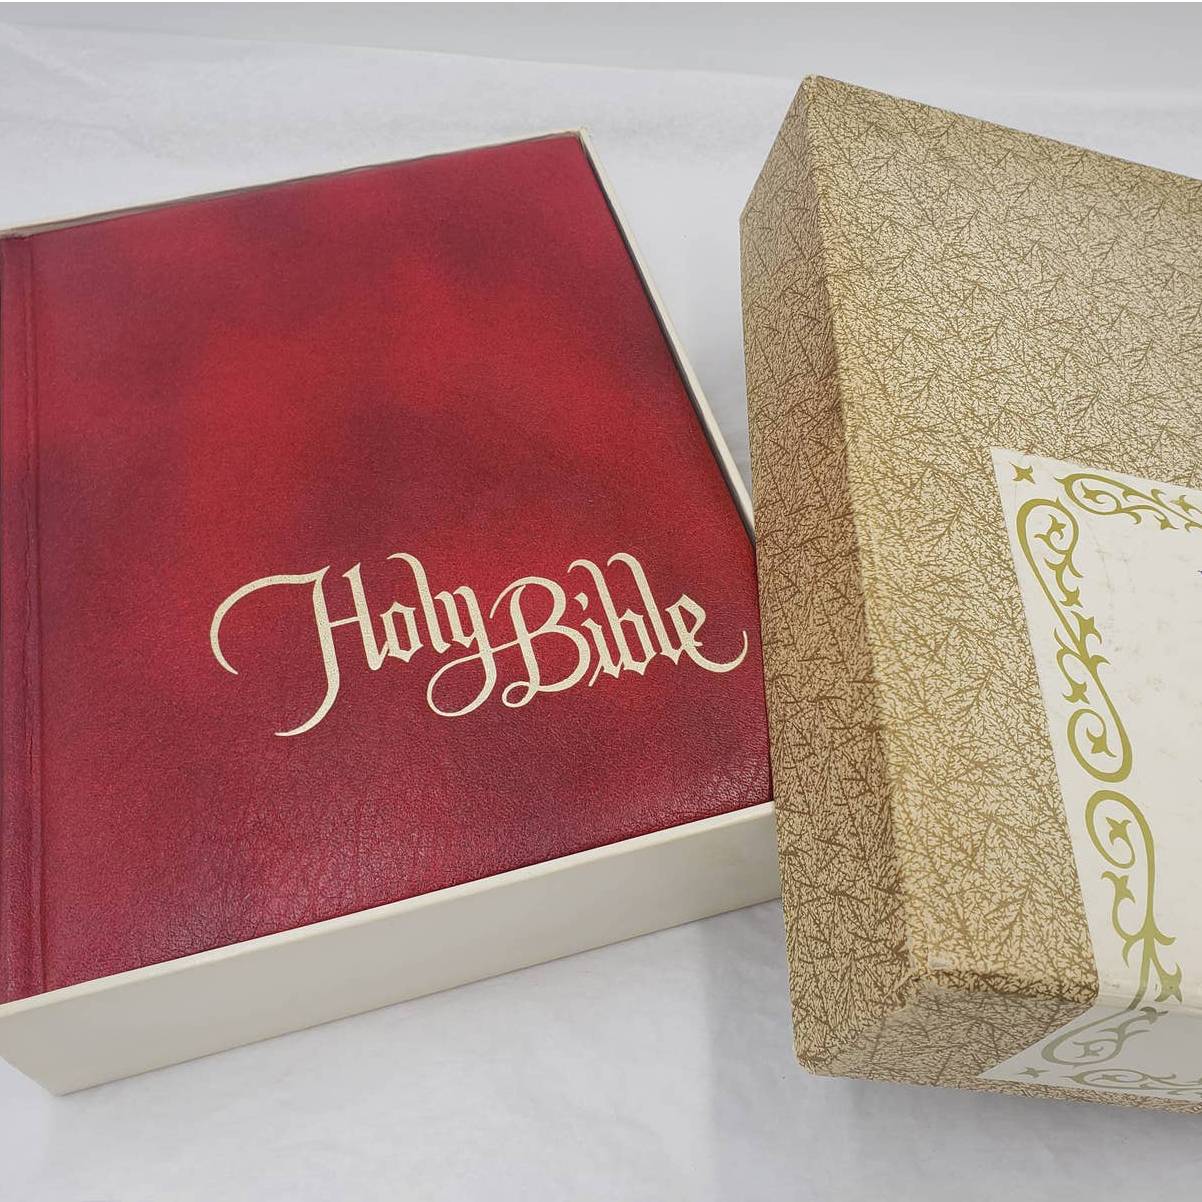 1970s The New American Bible Catholic Family Edition w/Words of Christ in Red